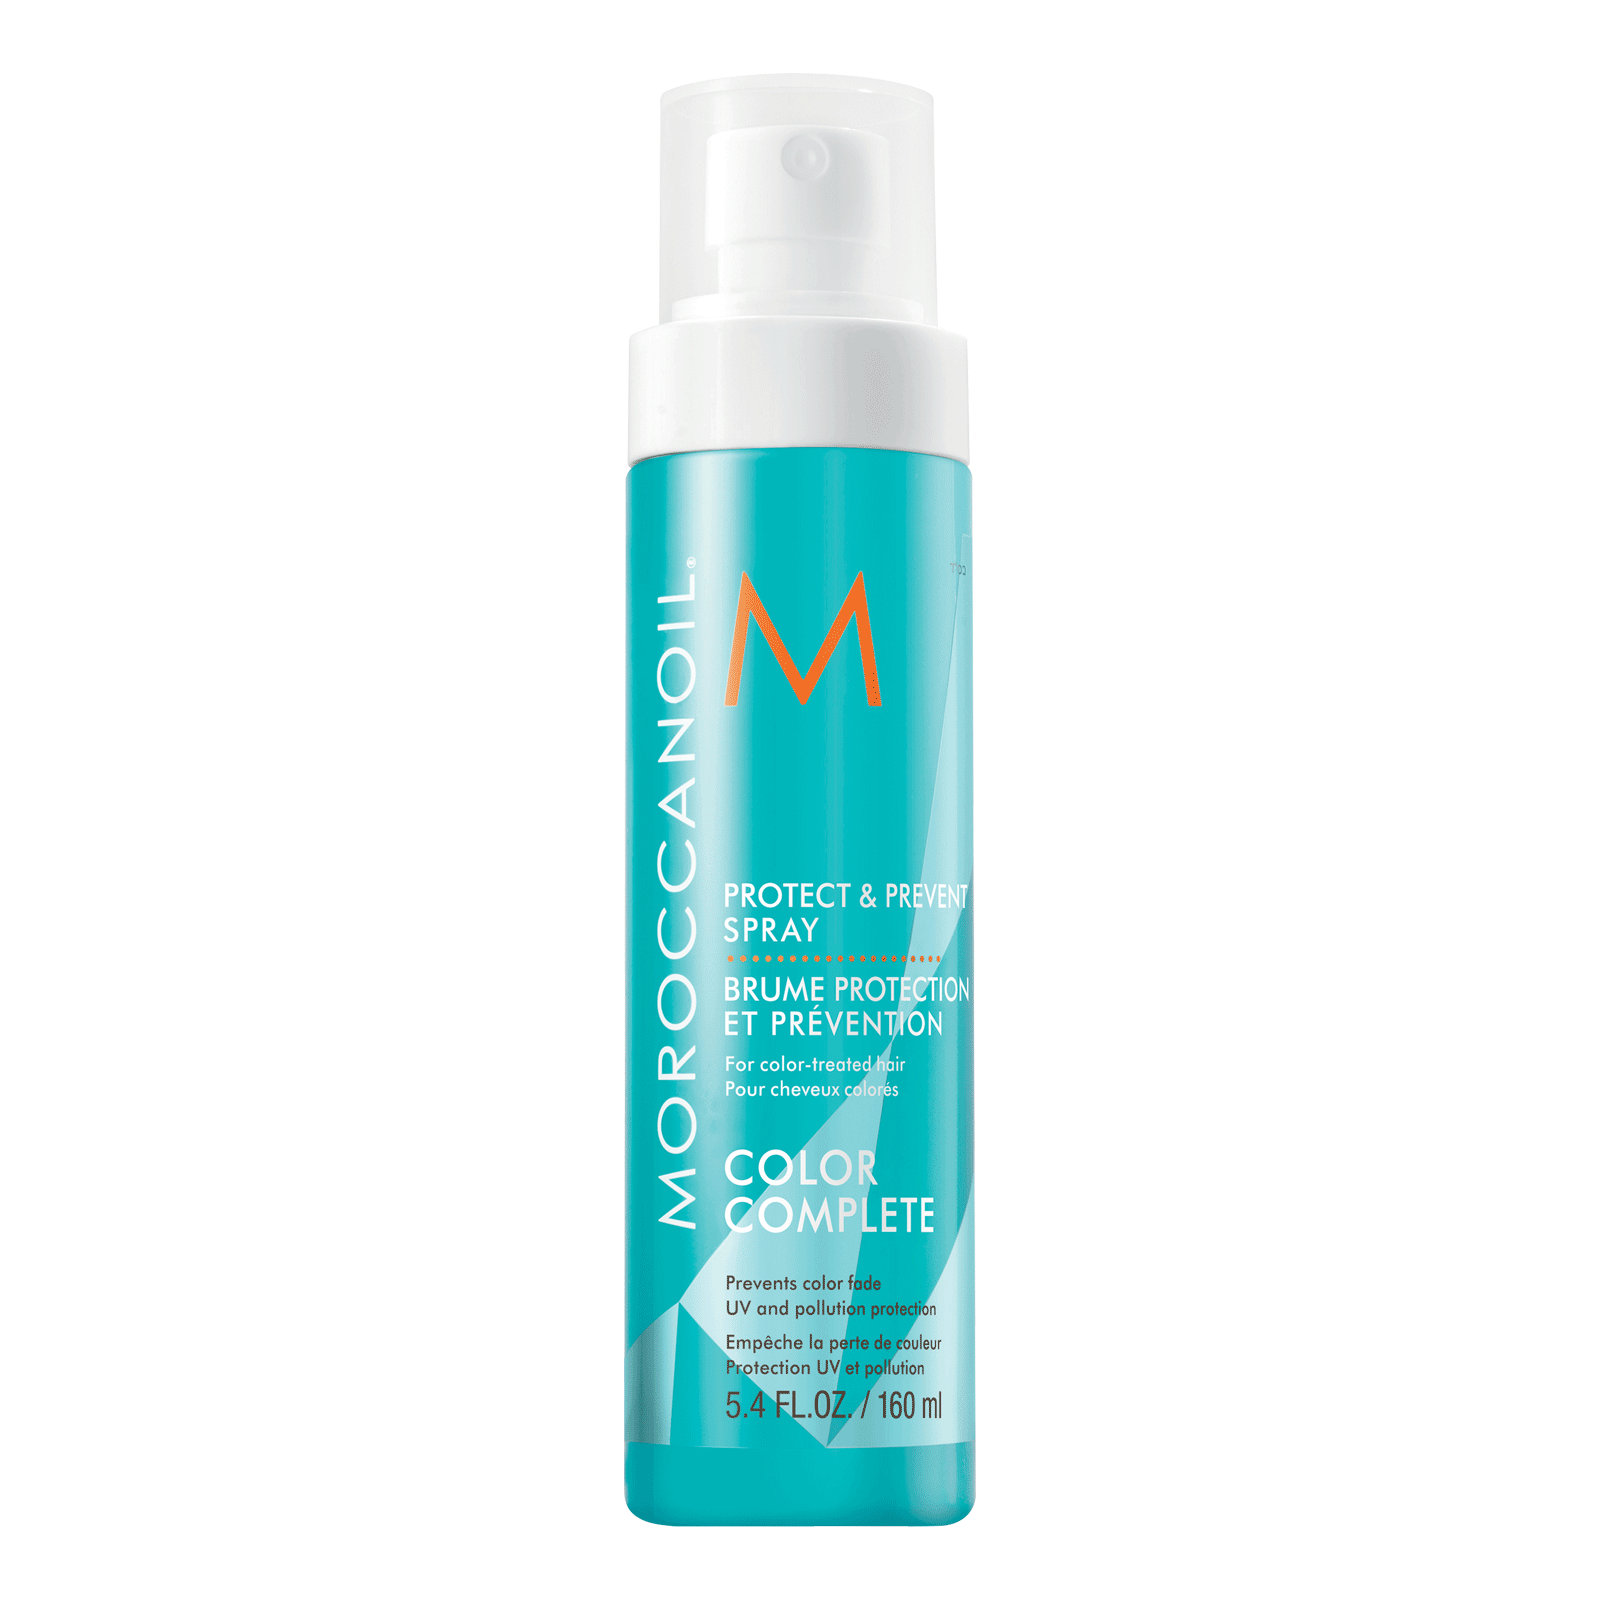 Moroccanoil Color Complete Protect & Prevent Spray 160ml - Feel Gorgeous